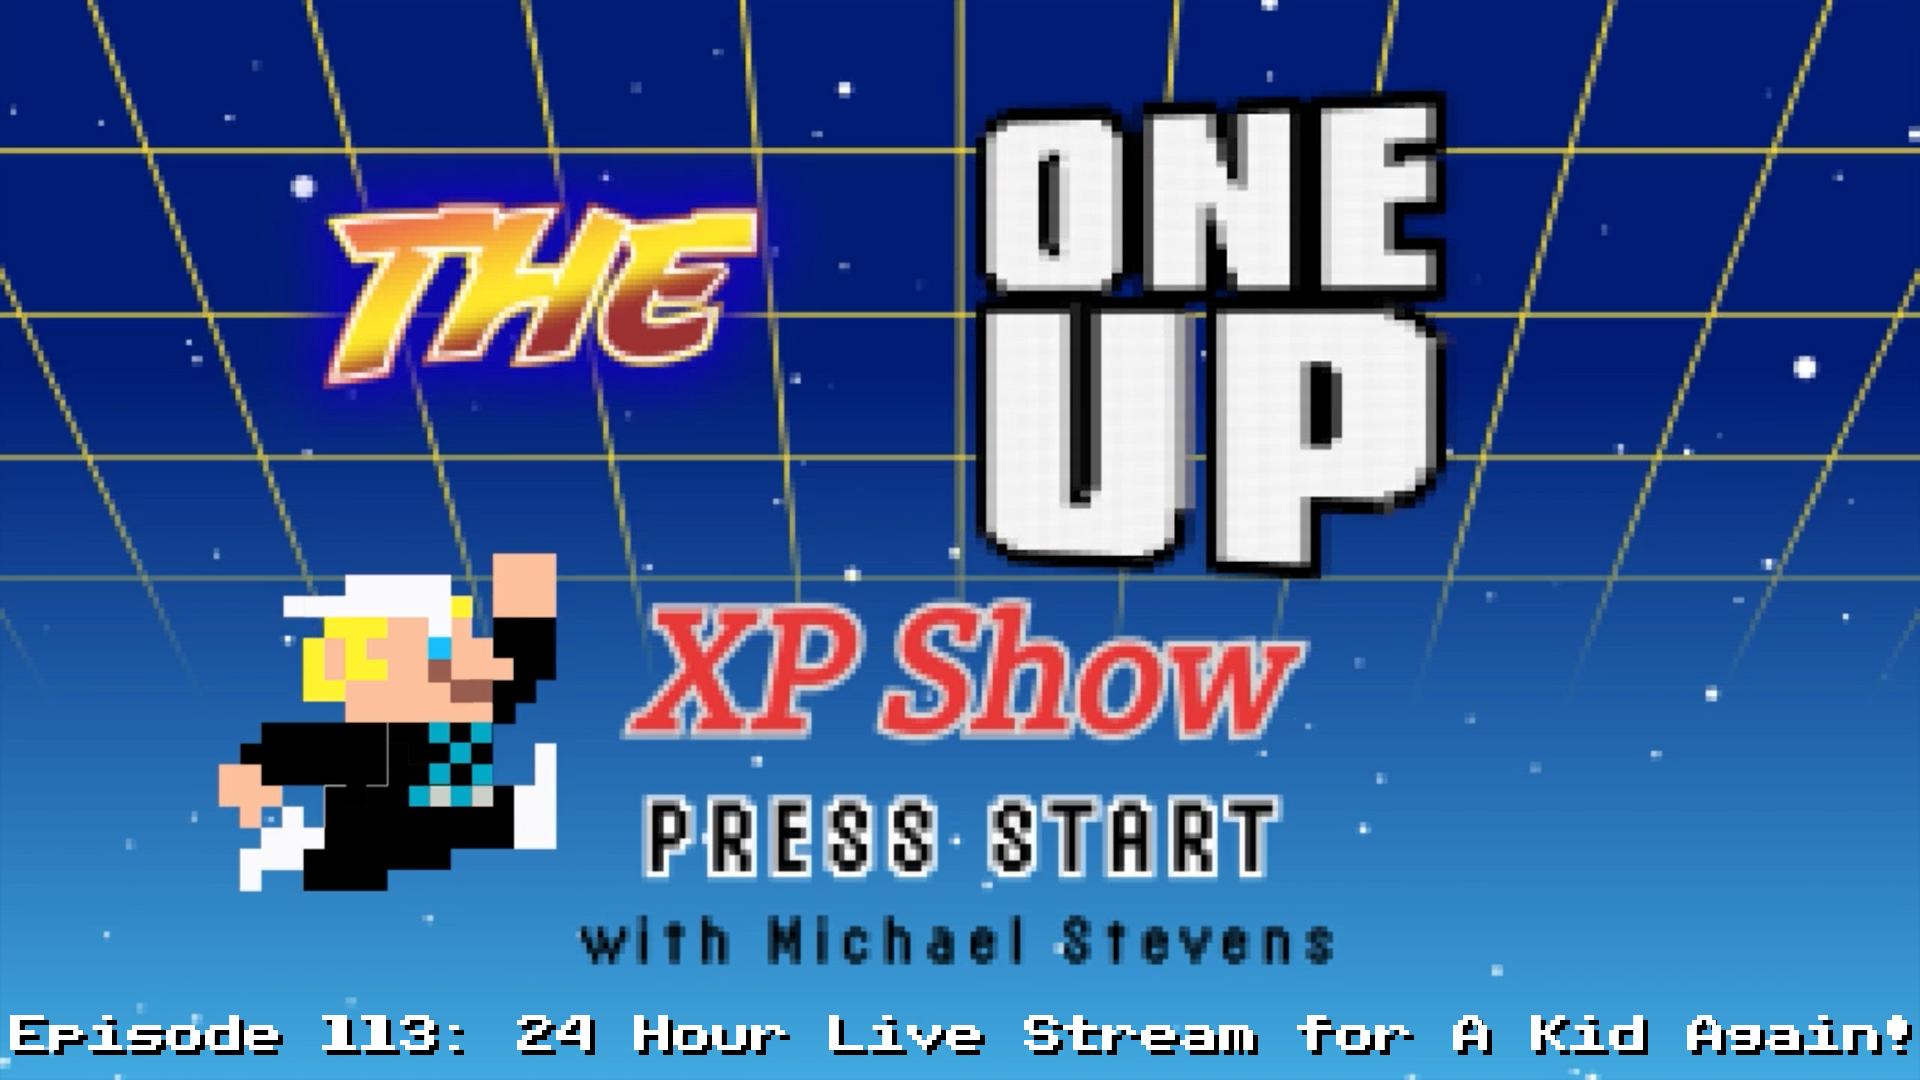 The One Up XP Show - Episode 113: 24 Hour Stream for A Kid Again!